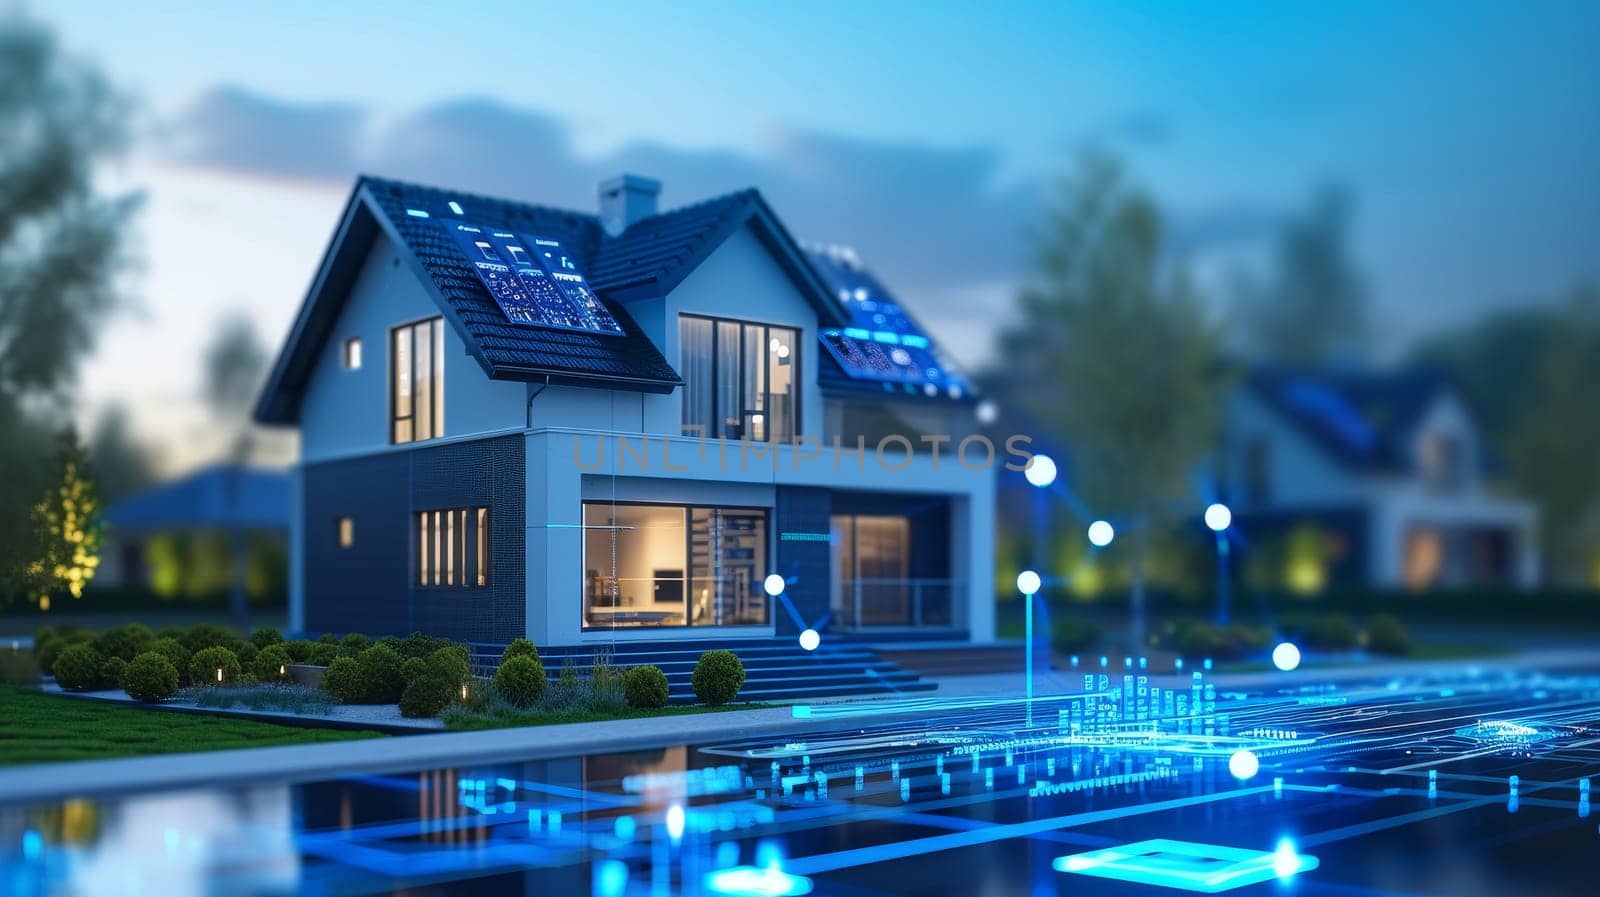 Illustration of a smart home with digital interface and solar panels at dusk